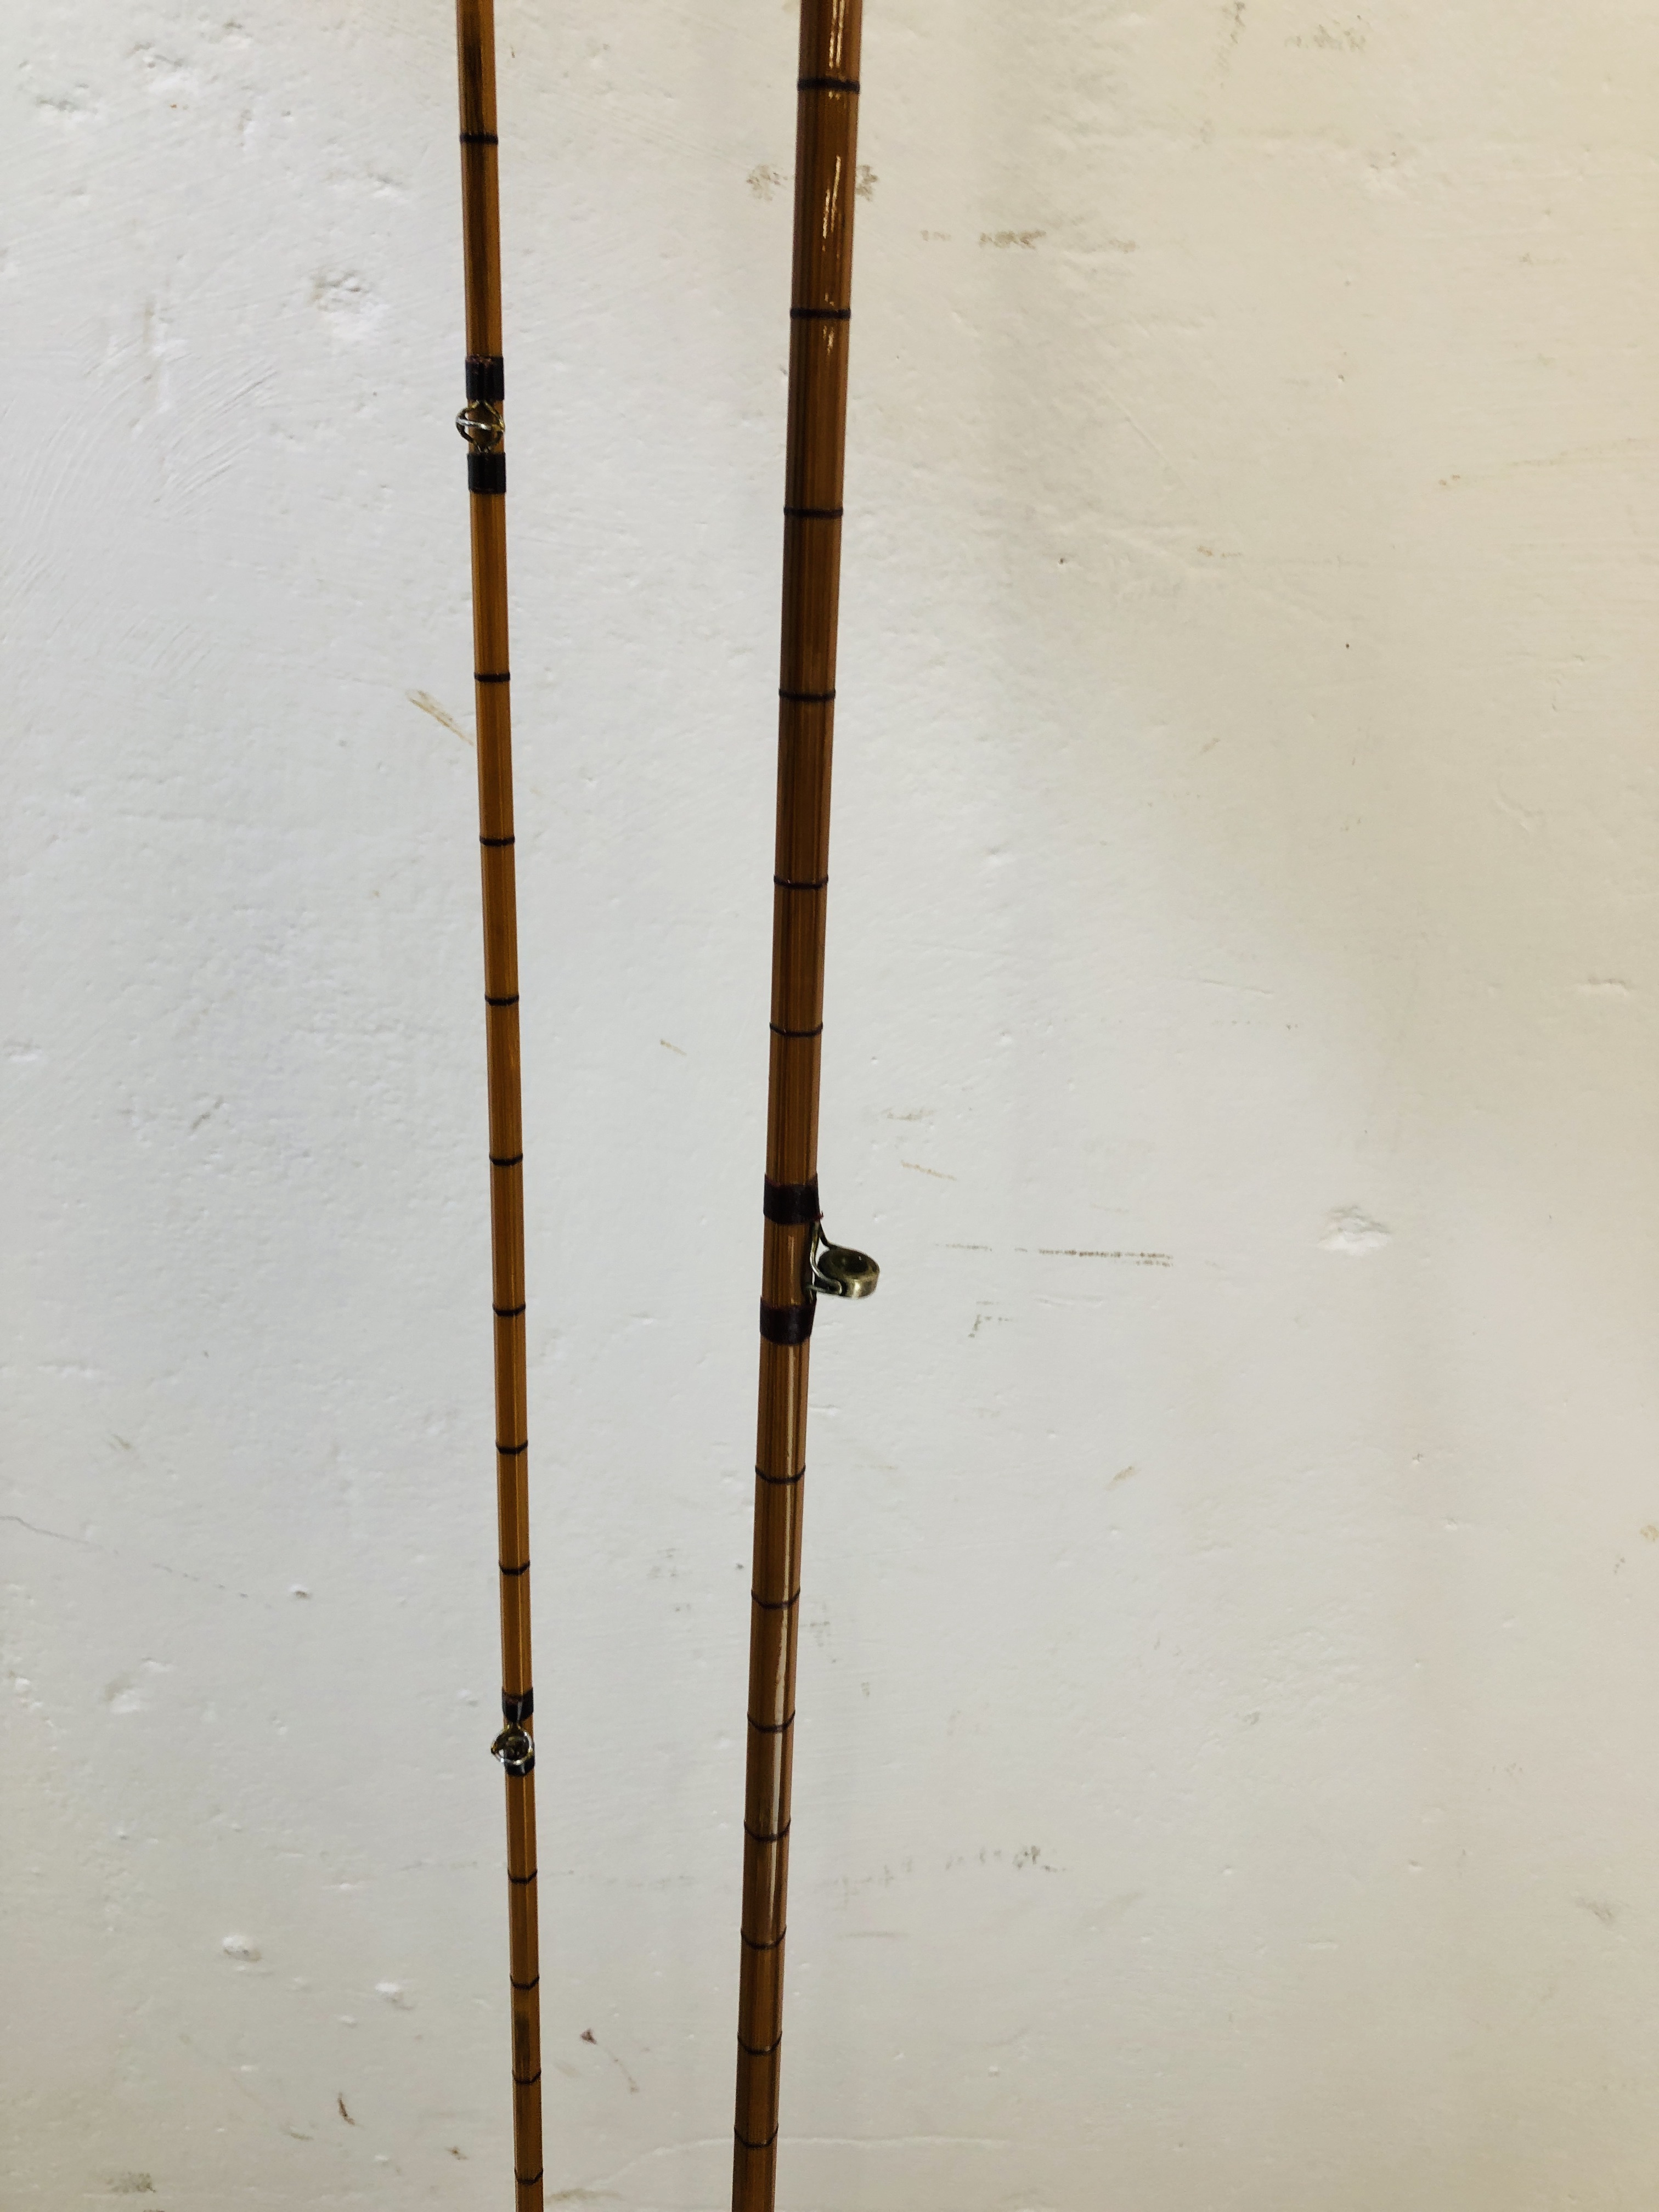 A HARDY "THE PERFECTION" TWO PIECE SPLIT CANE FISHING ROD IN BAG - Image 4 of 9